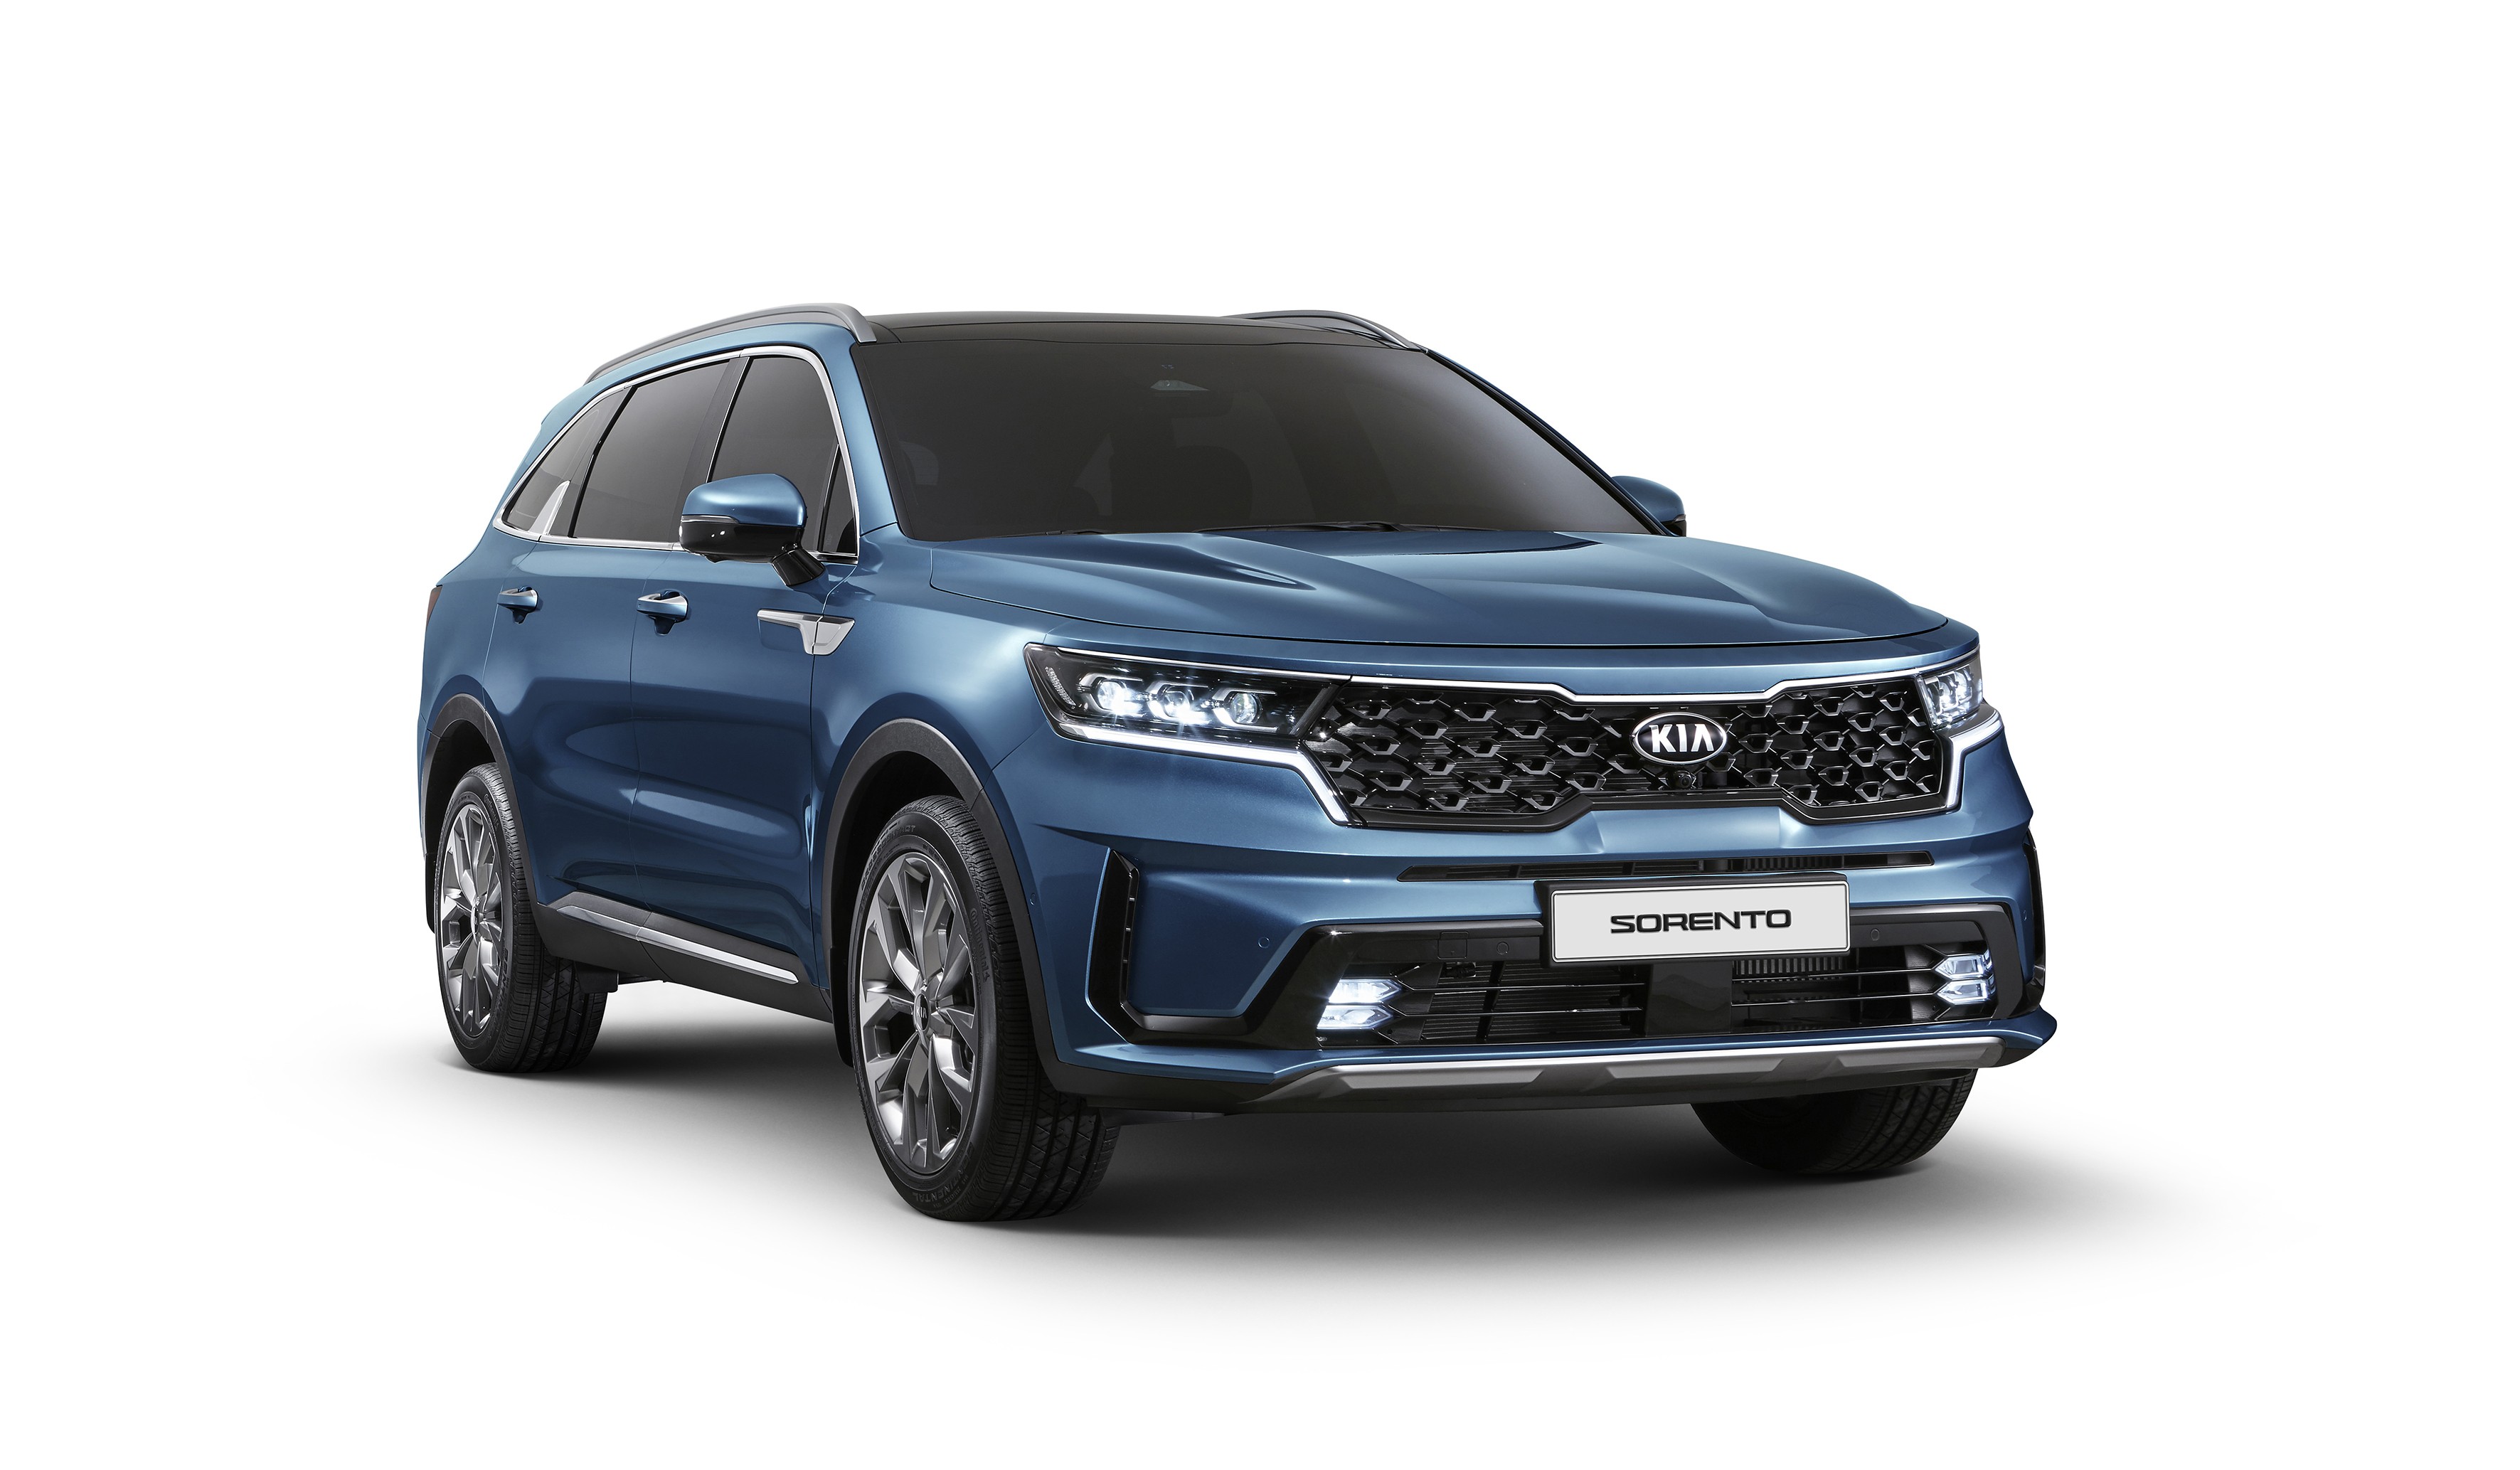 https://s1.cdn.autoevolution.com/images/news/gallery/2021-kia-sorento-mq4-revealed-with-refined-boldness-will-premiere-next-month_13.jpg